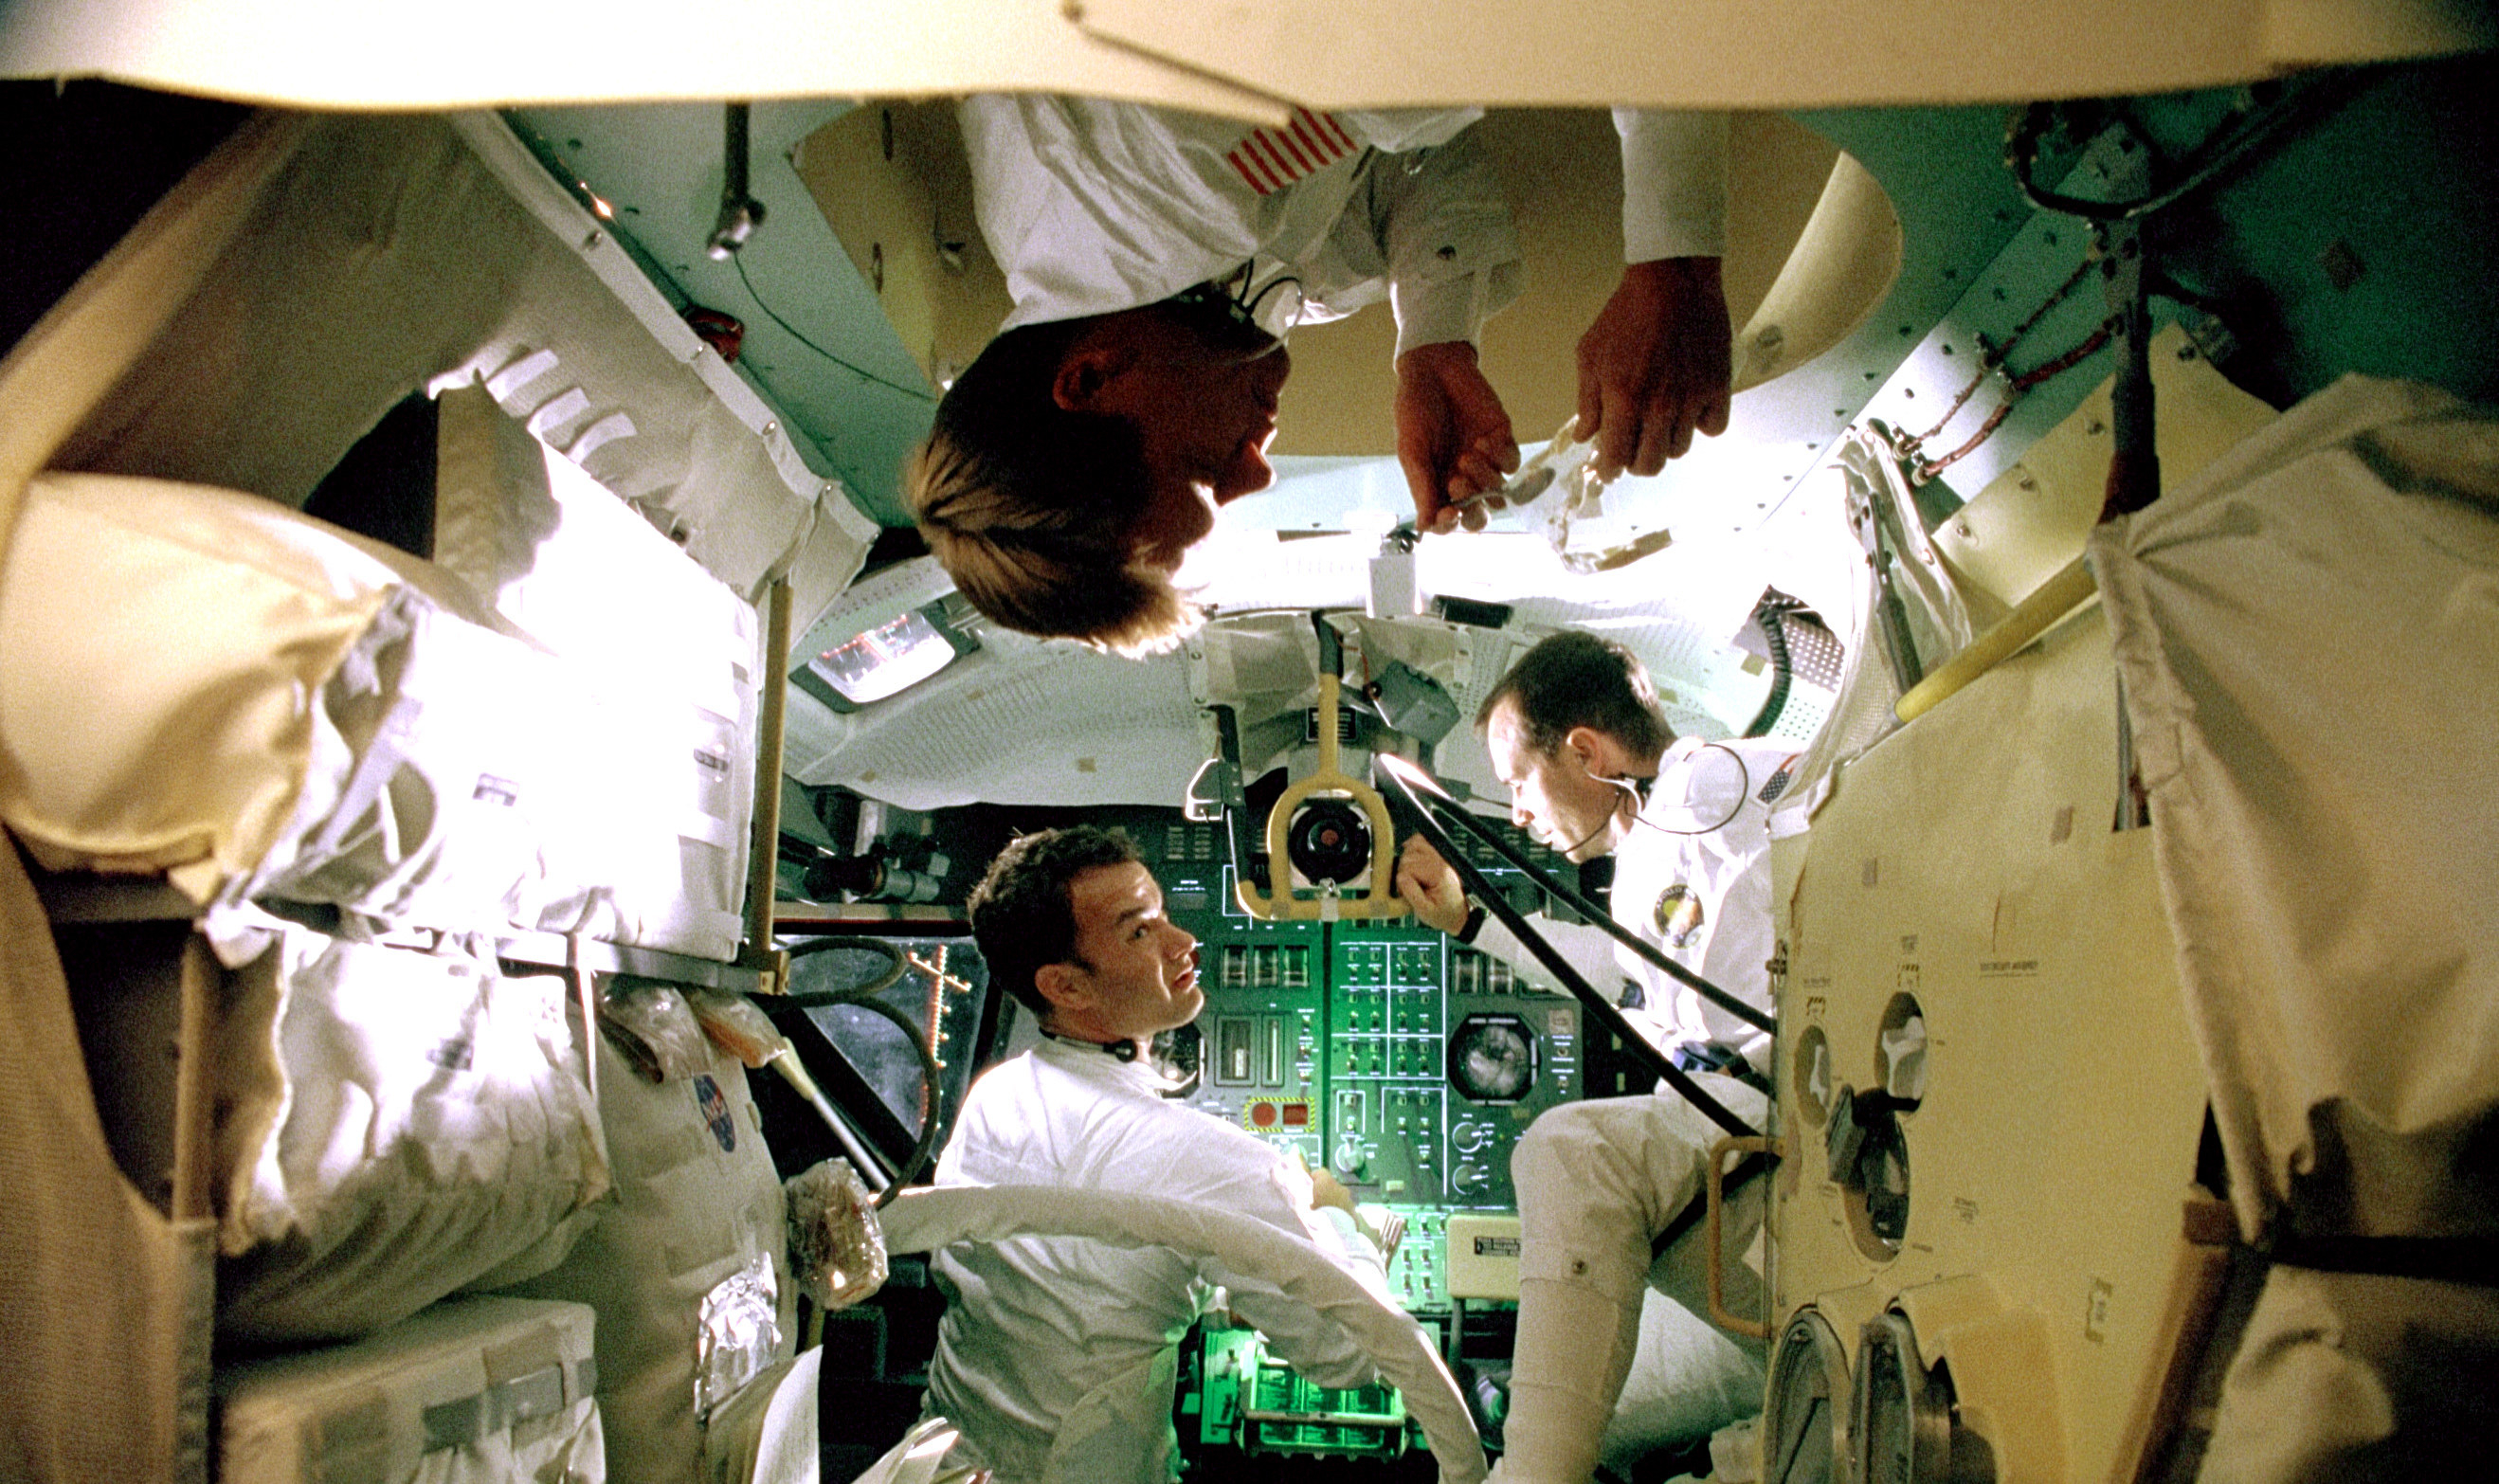 the astronauts floating in the capsule